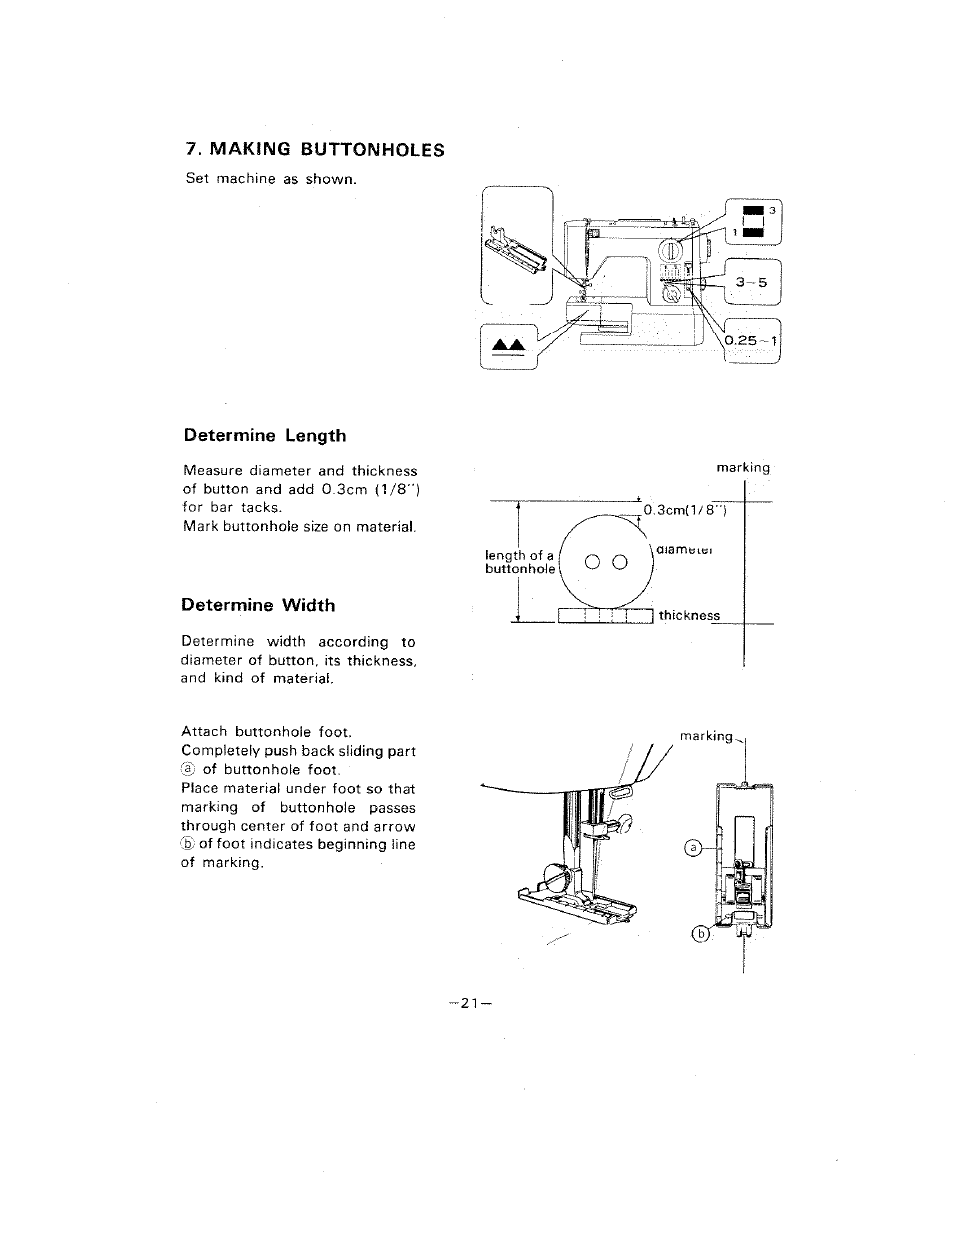 Making buttonholes, Determine length, Determine width | SINGER W1099 User Manual | Page 24 / 37